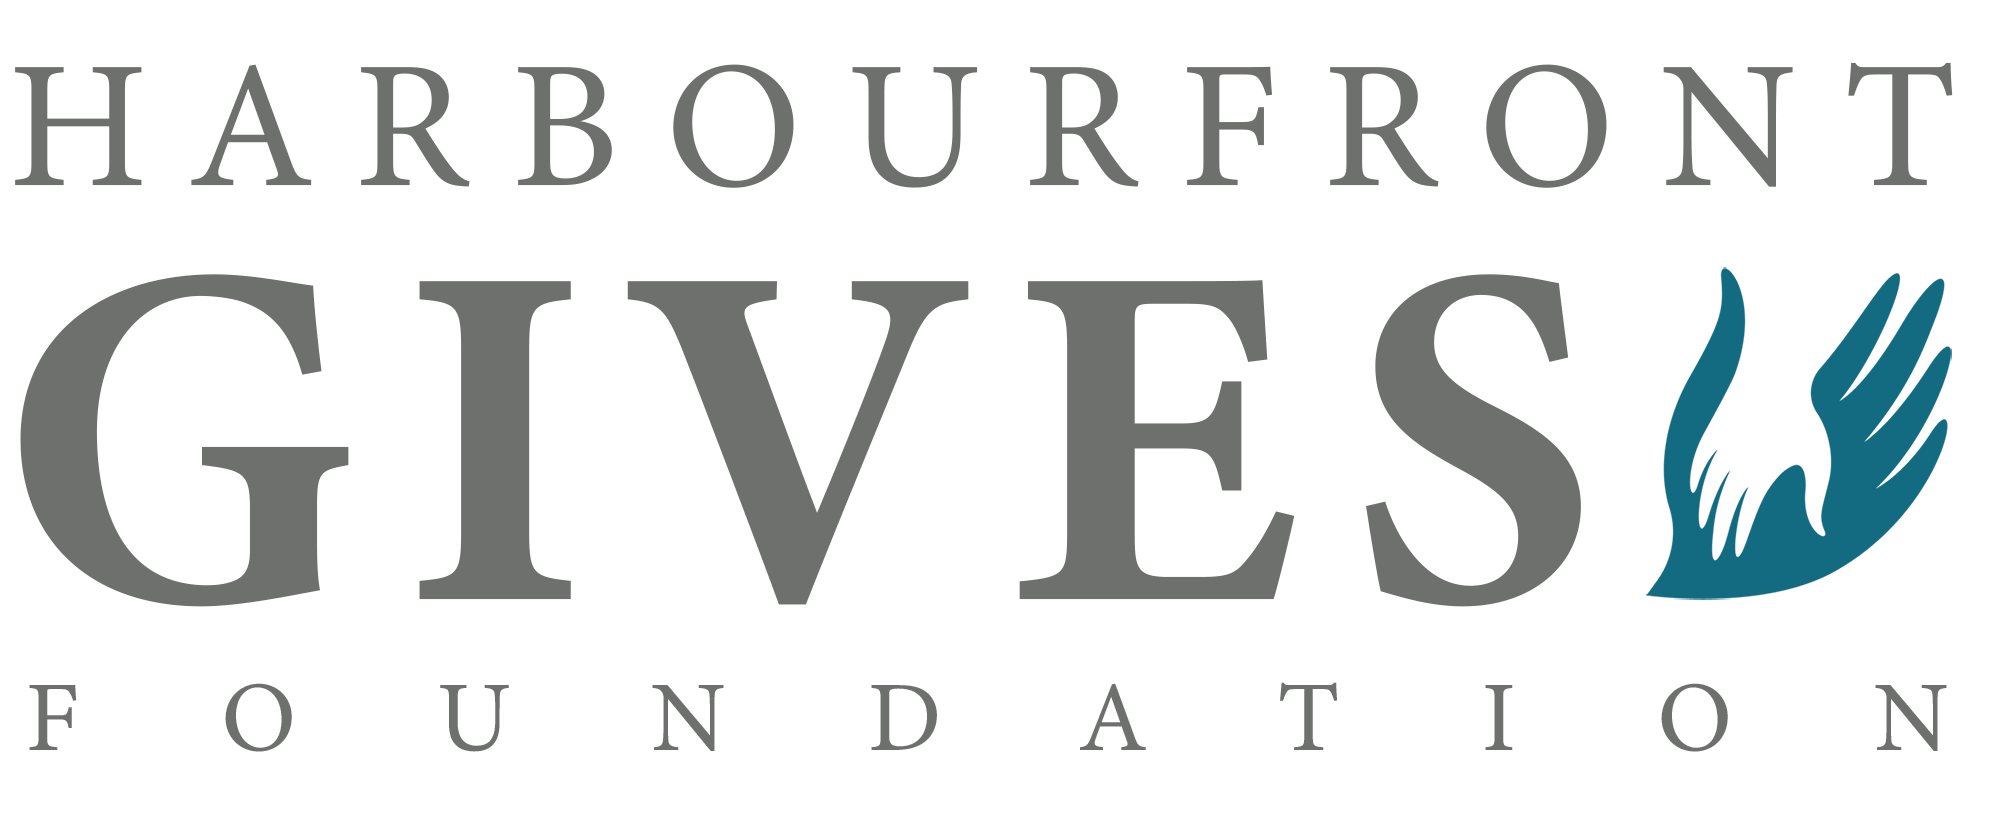 Harbourfront Gives Foundation logo